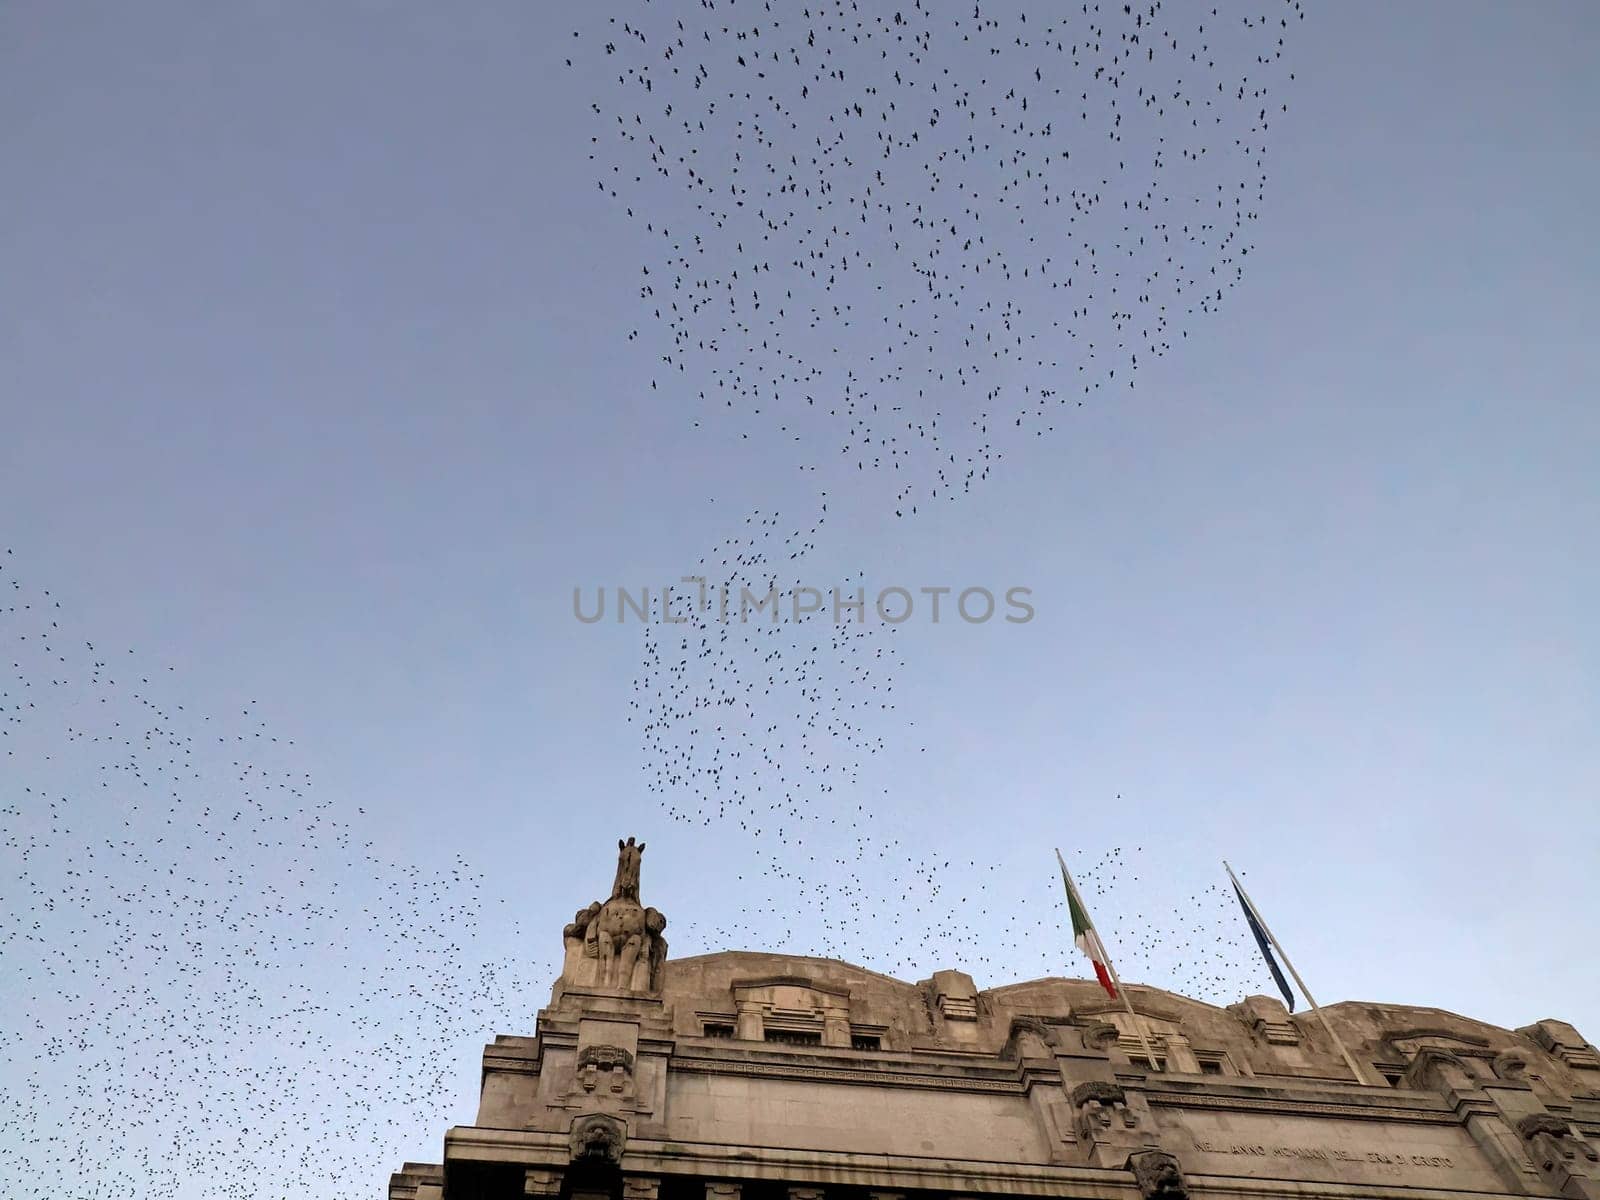 many birds flying outside milan Central rail station at night by AndreaIzzotti